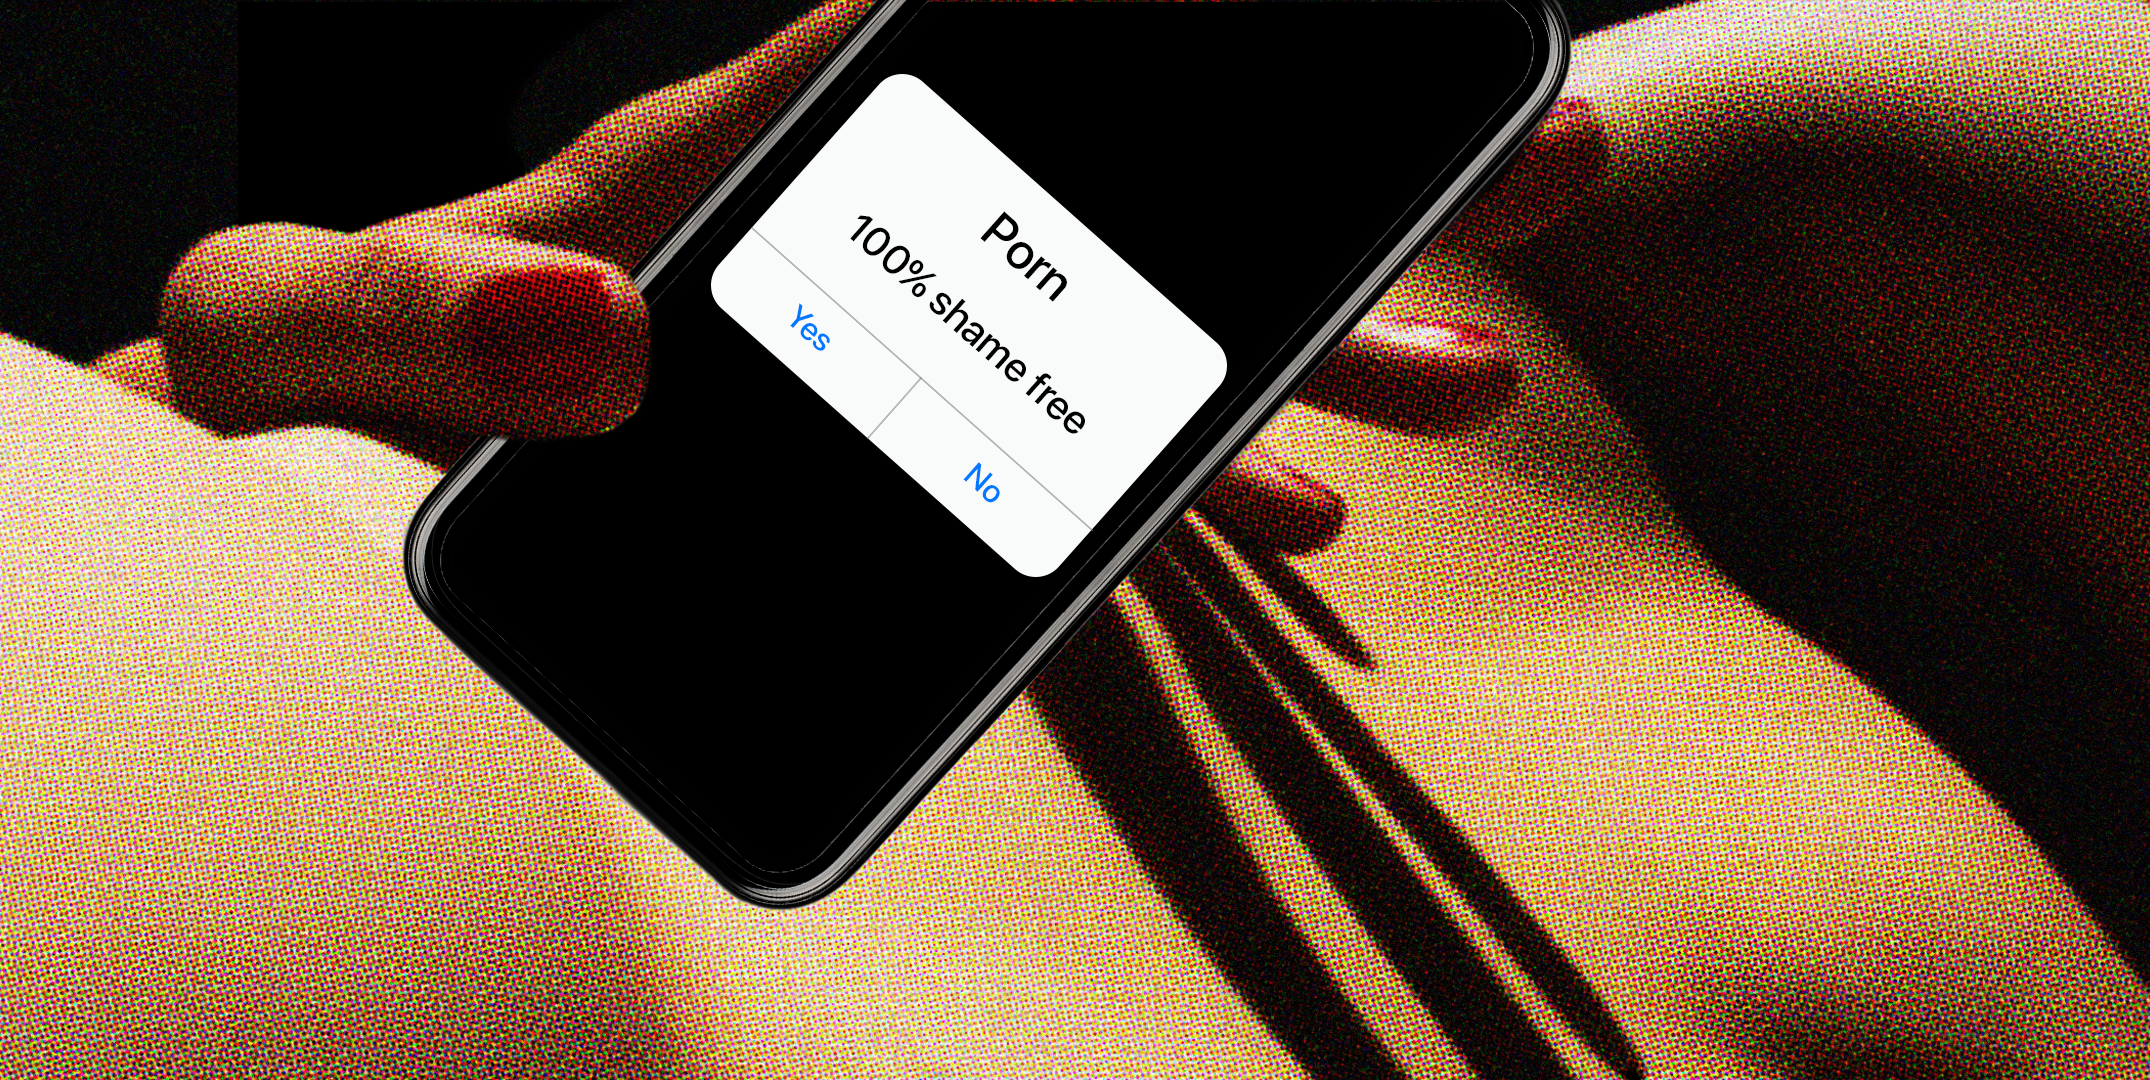 Porn Site For Phones